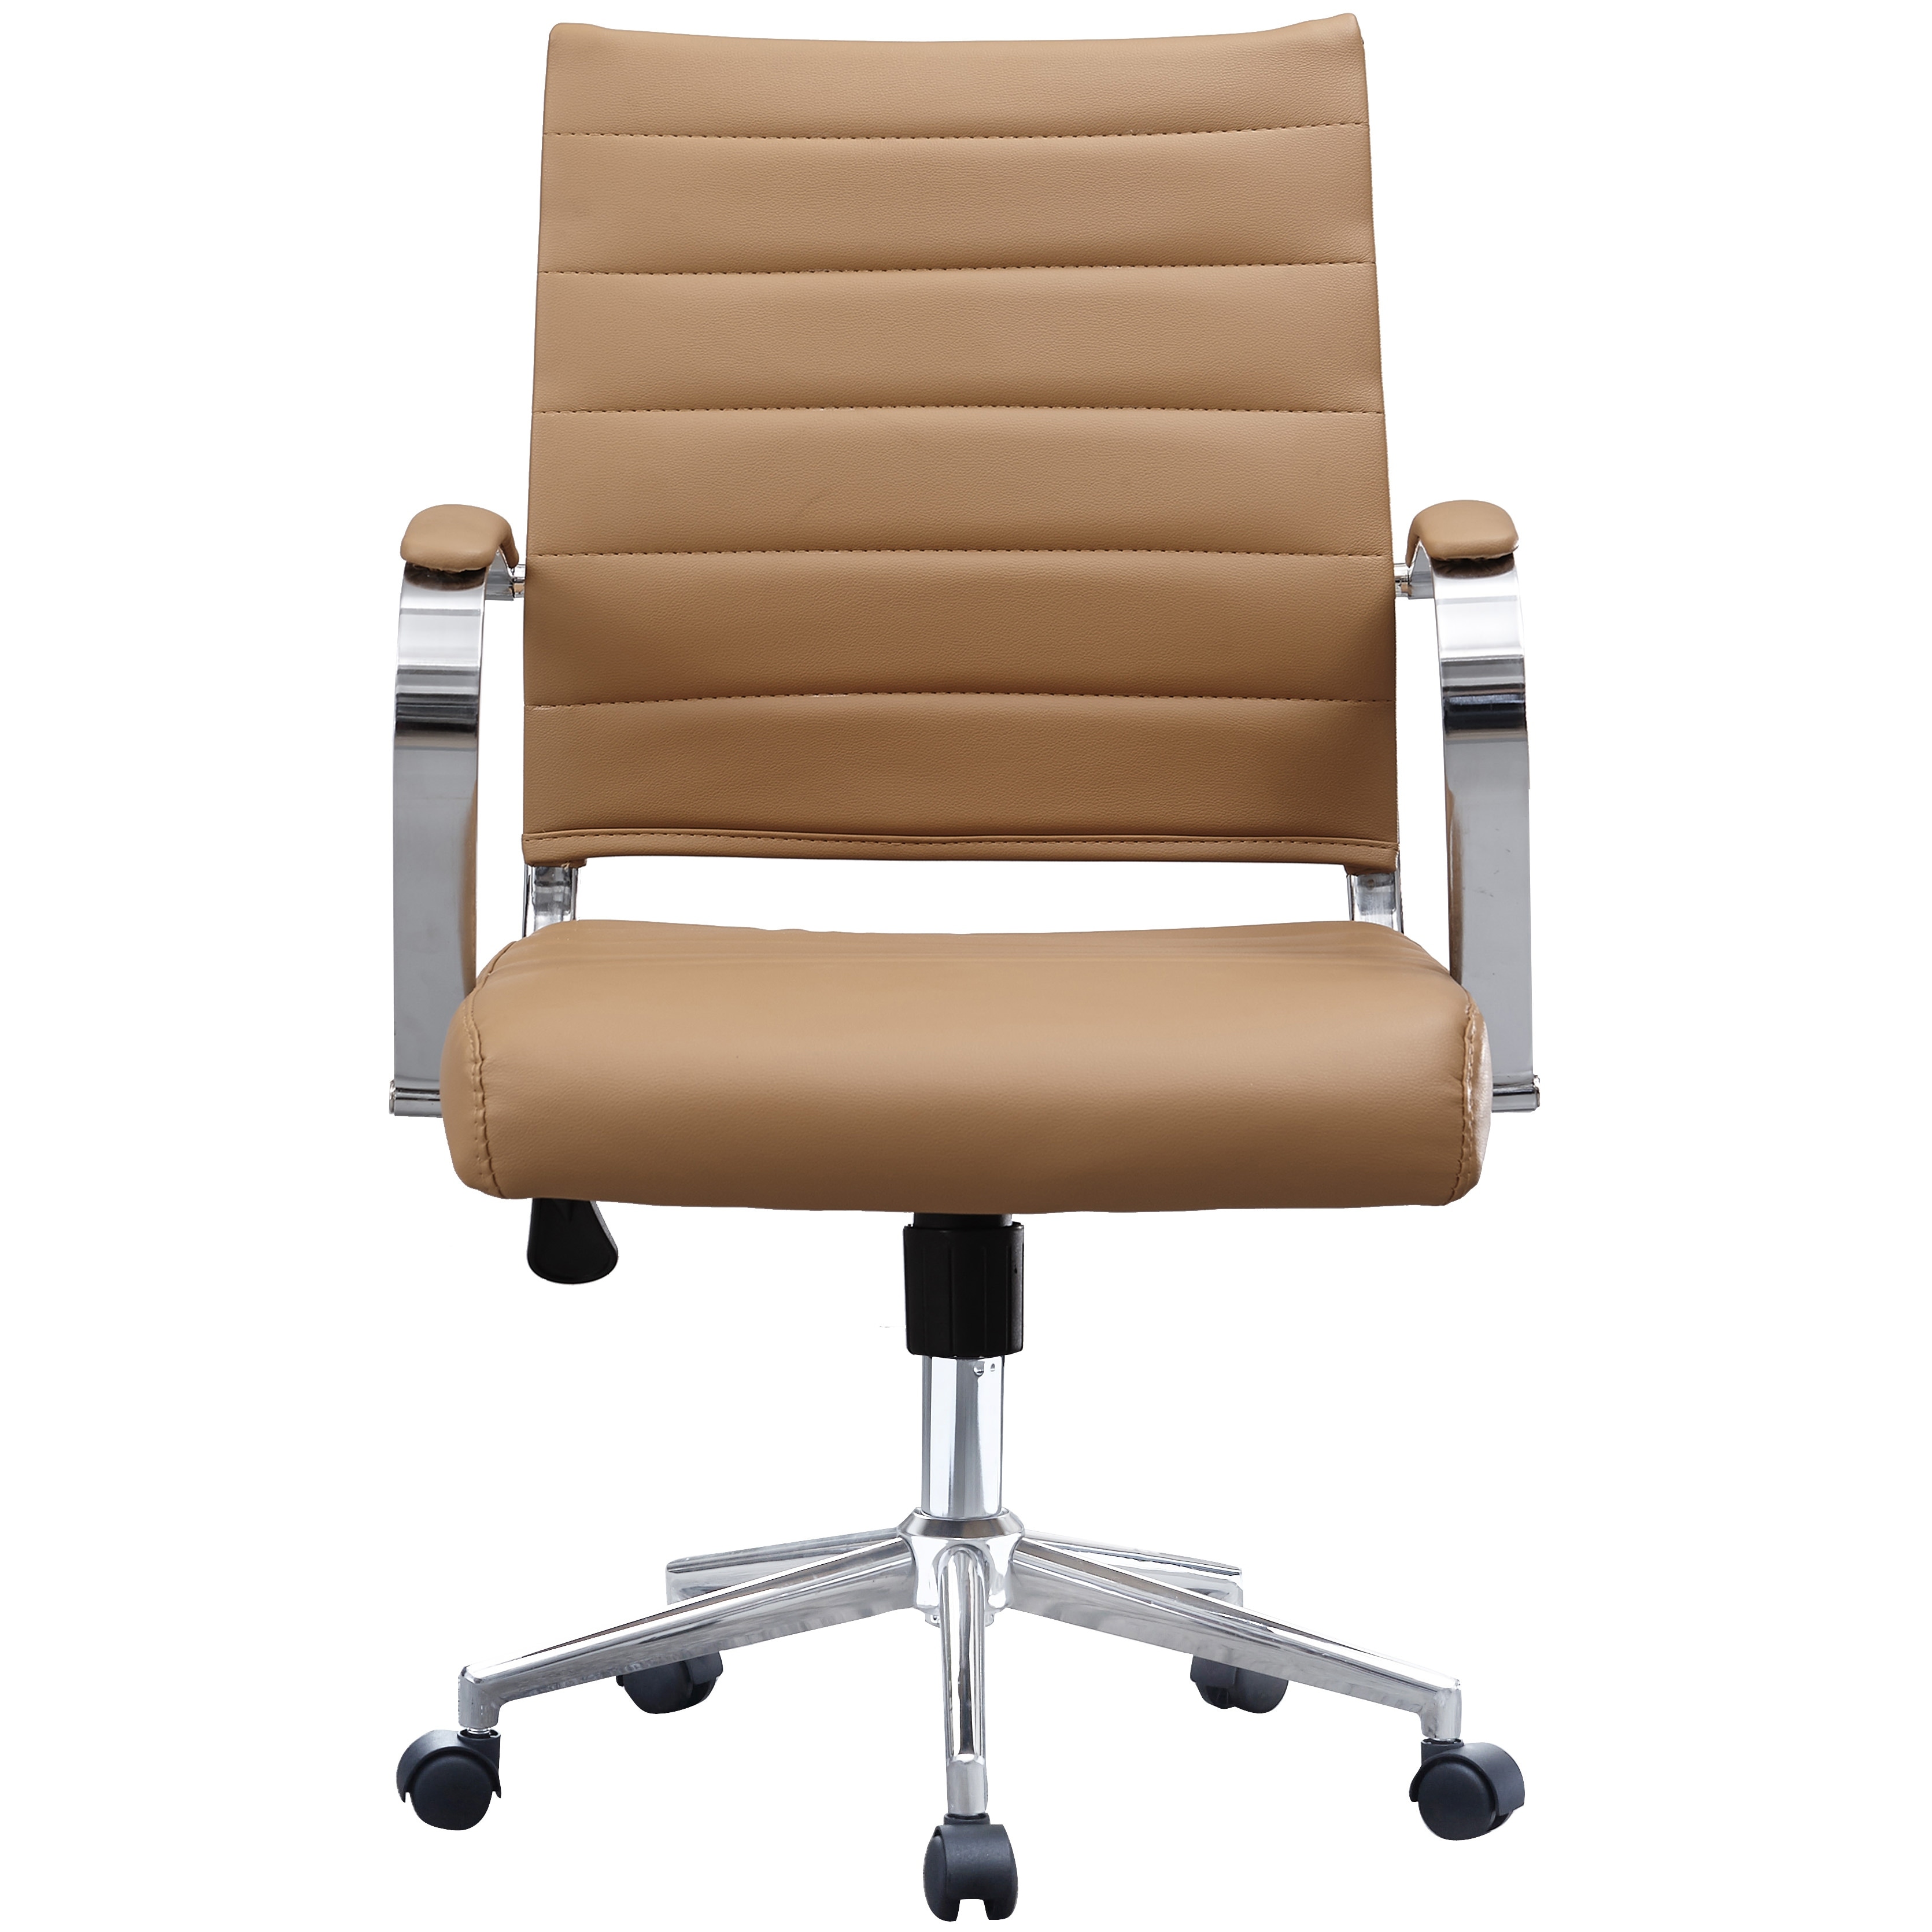 https://ak1.ostkcdn.com/images/products/is/images/direct/defd1f243e4ddd0a7e90943ca7721394e37e0a0d/Modern-Office-Chair%2C-Executive-Mid-Back-Conference-Room-Chair-in-PU-Leather-with-Wheels-and-Arms.jpg